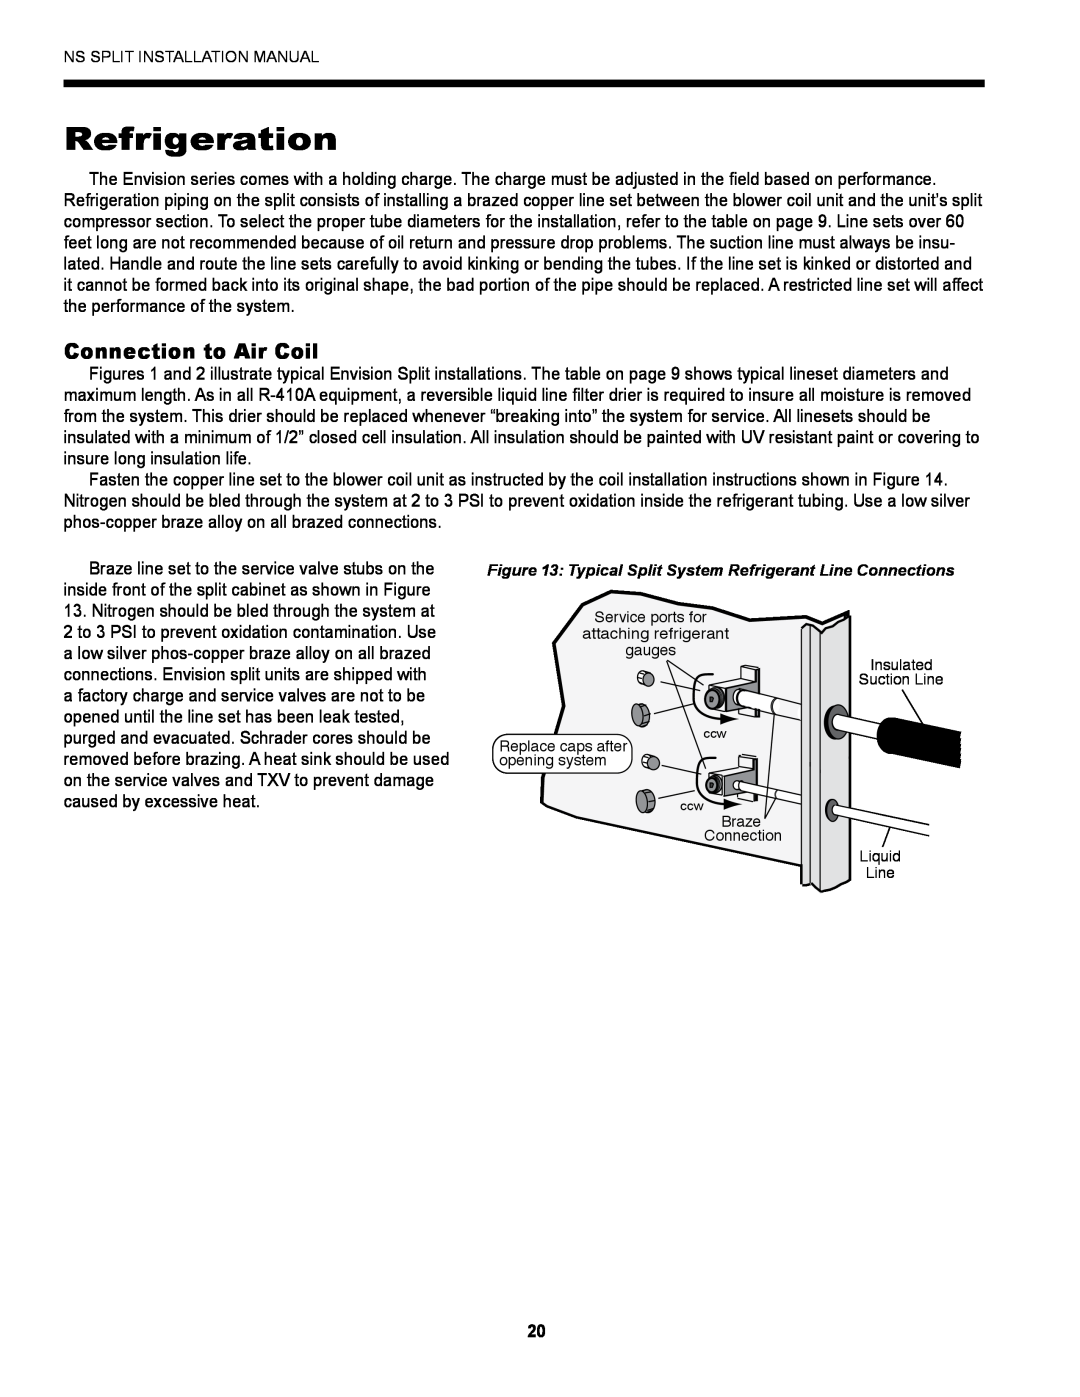 Envision Peripherals Series installation manual Refrigeration, Connection to Air Coil 